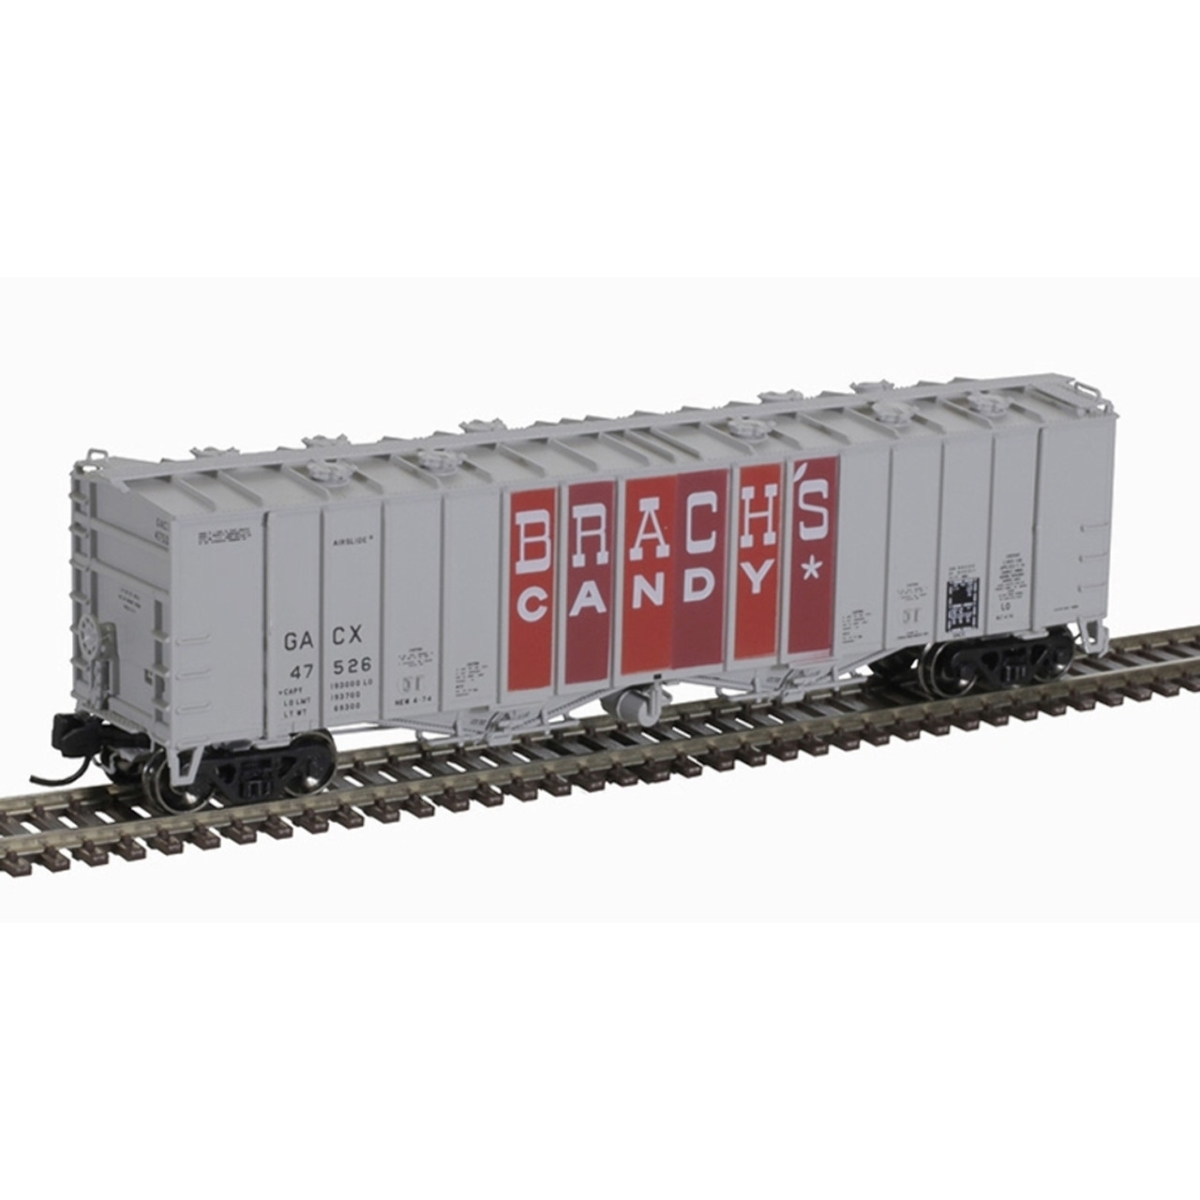 Atlas Model ATL50005810 N Scale Brach Candy Airslide Covered Hopper for No.47534